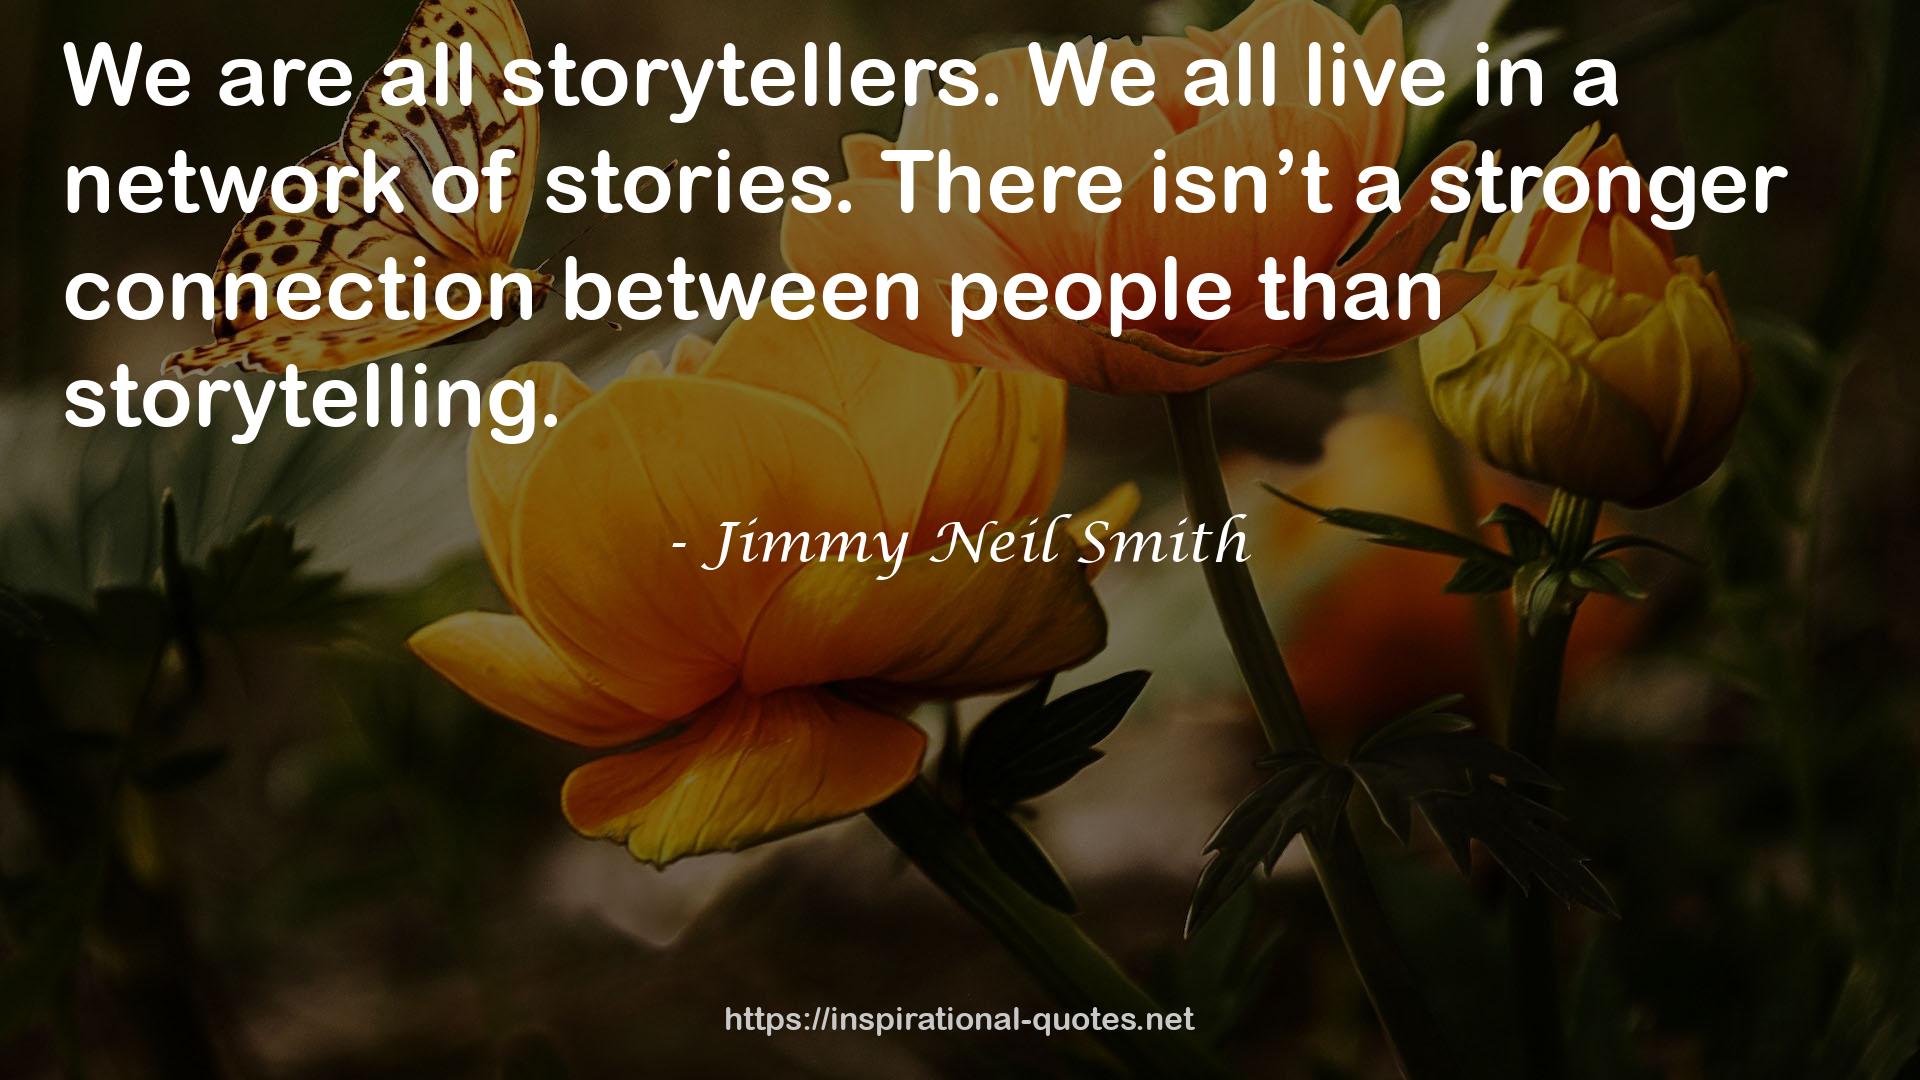 Jimmy Neil Smith QUOTES